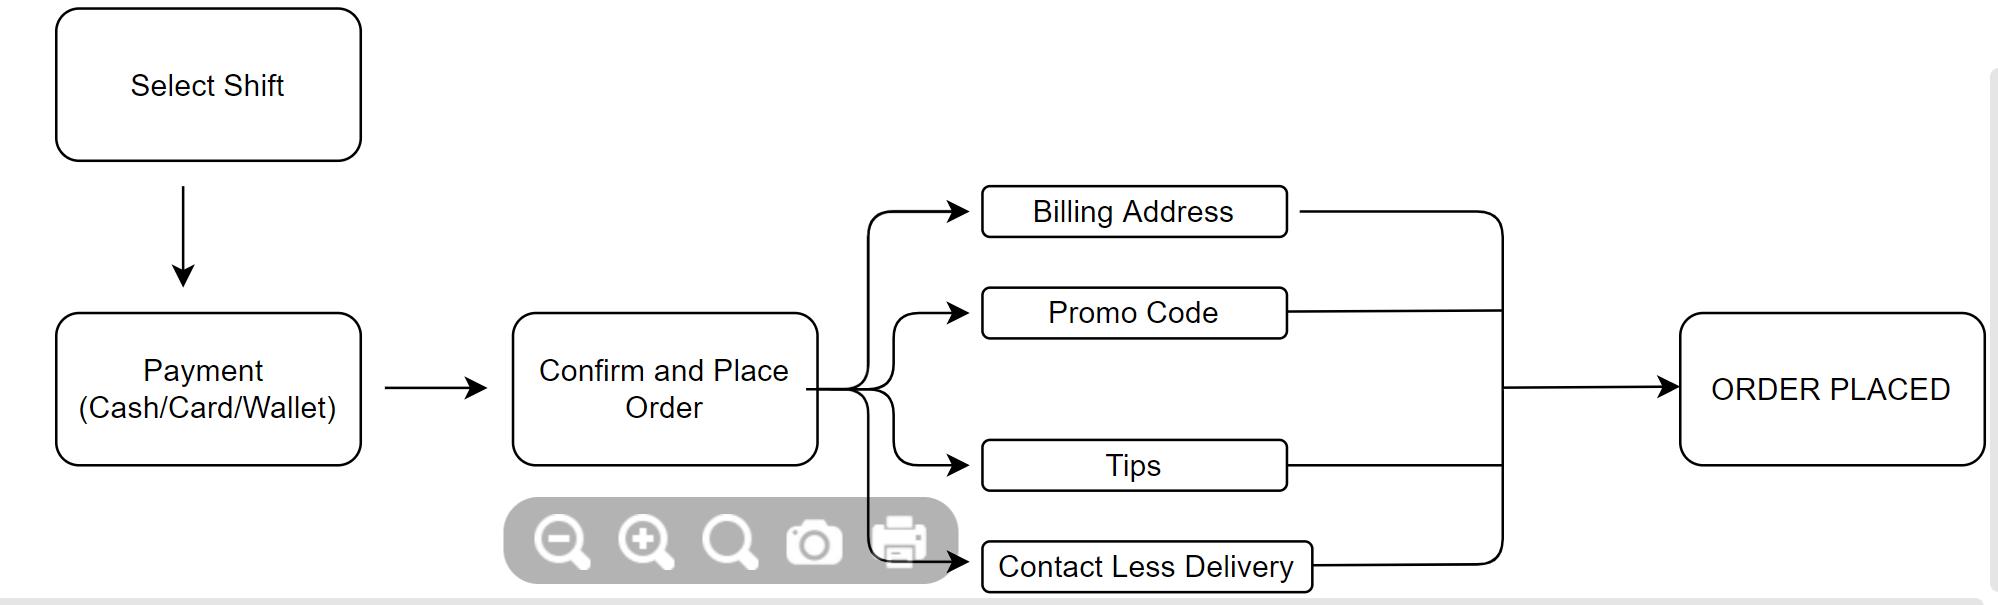 customer flow of the delivery app part 3